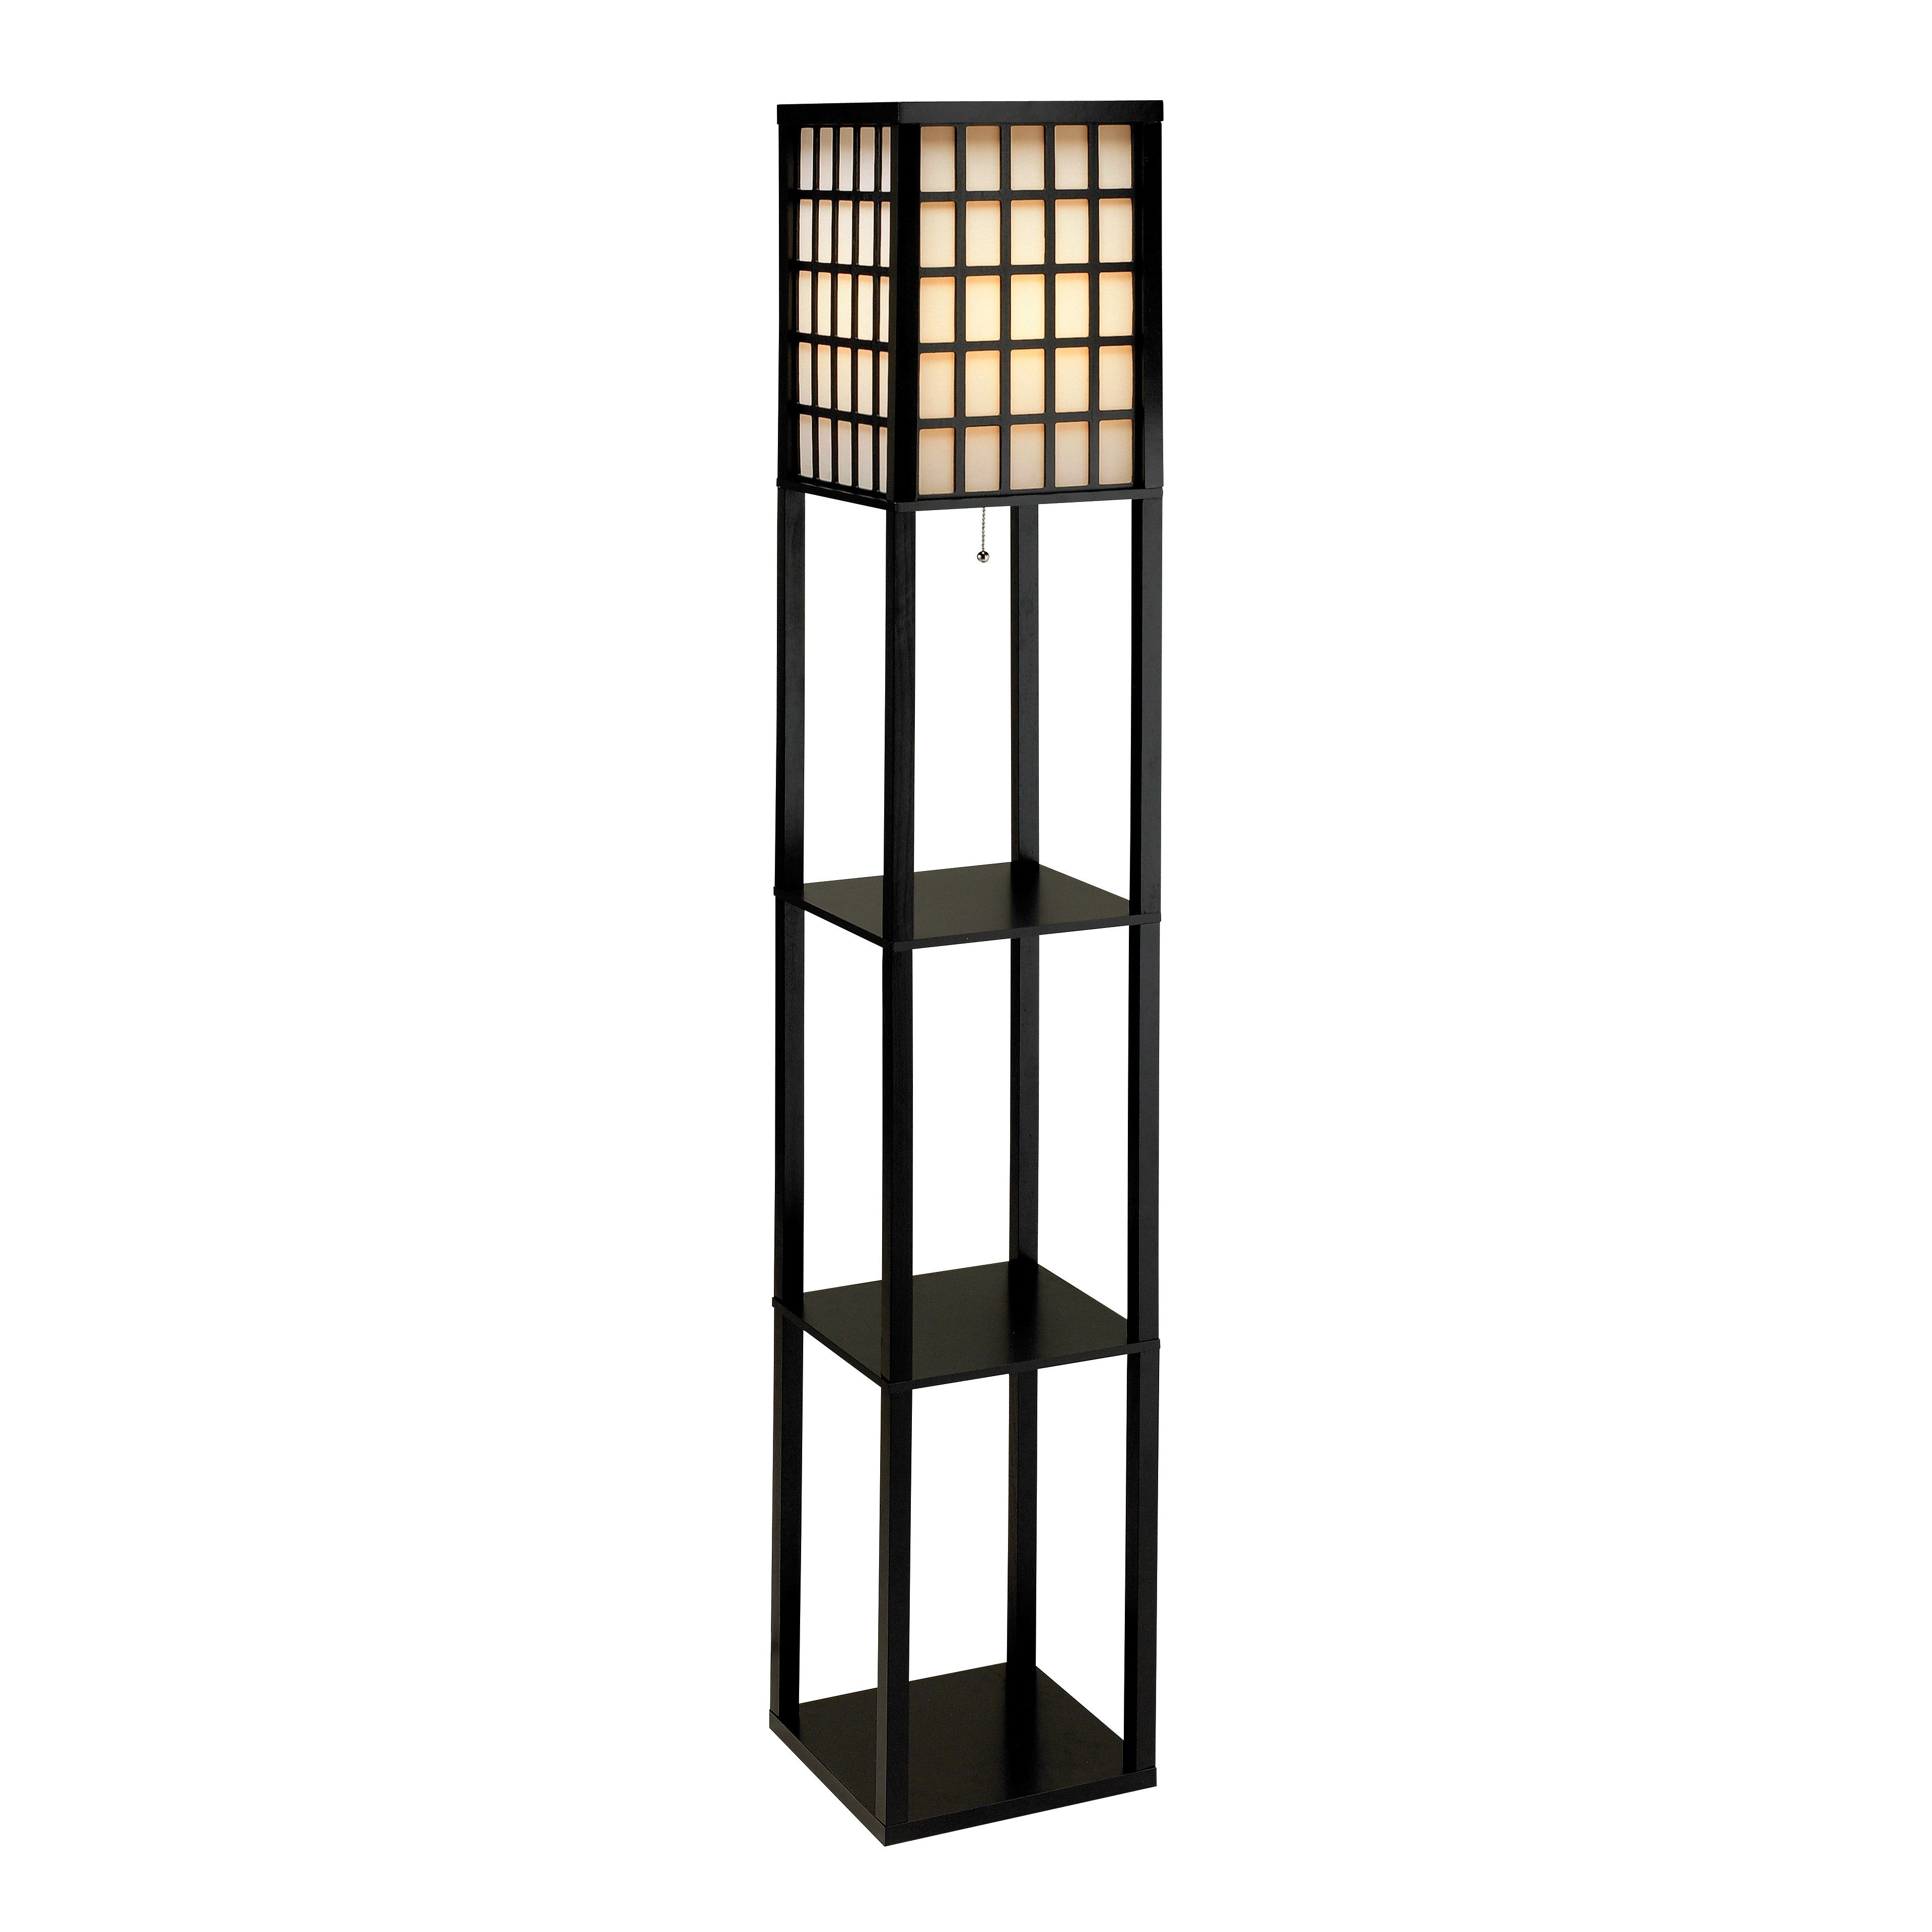 Remona 63 Column Floor Lamp The Bedroom Floor Lamp With intended for dimensions 3837 X 3837